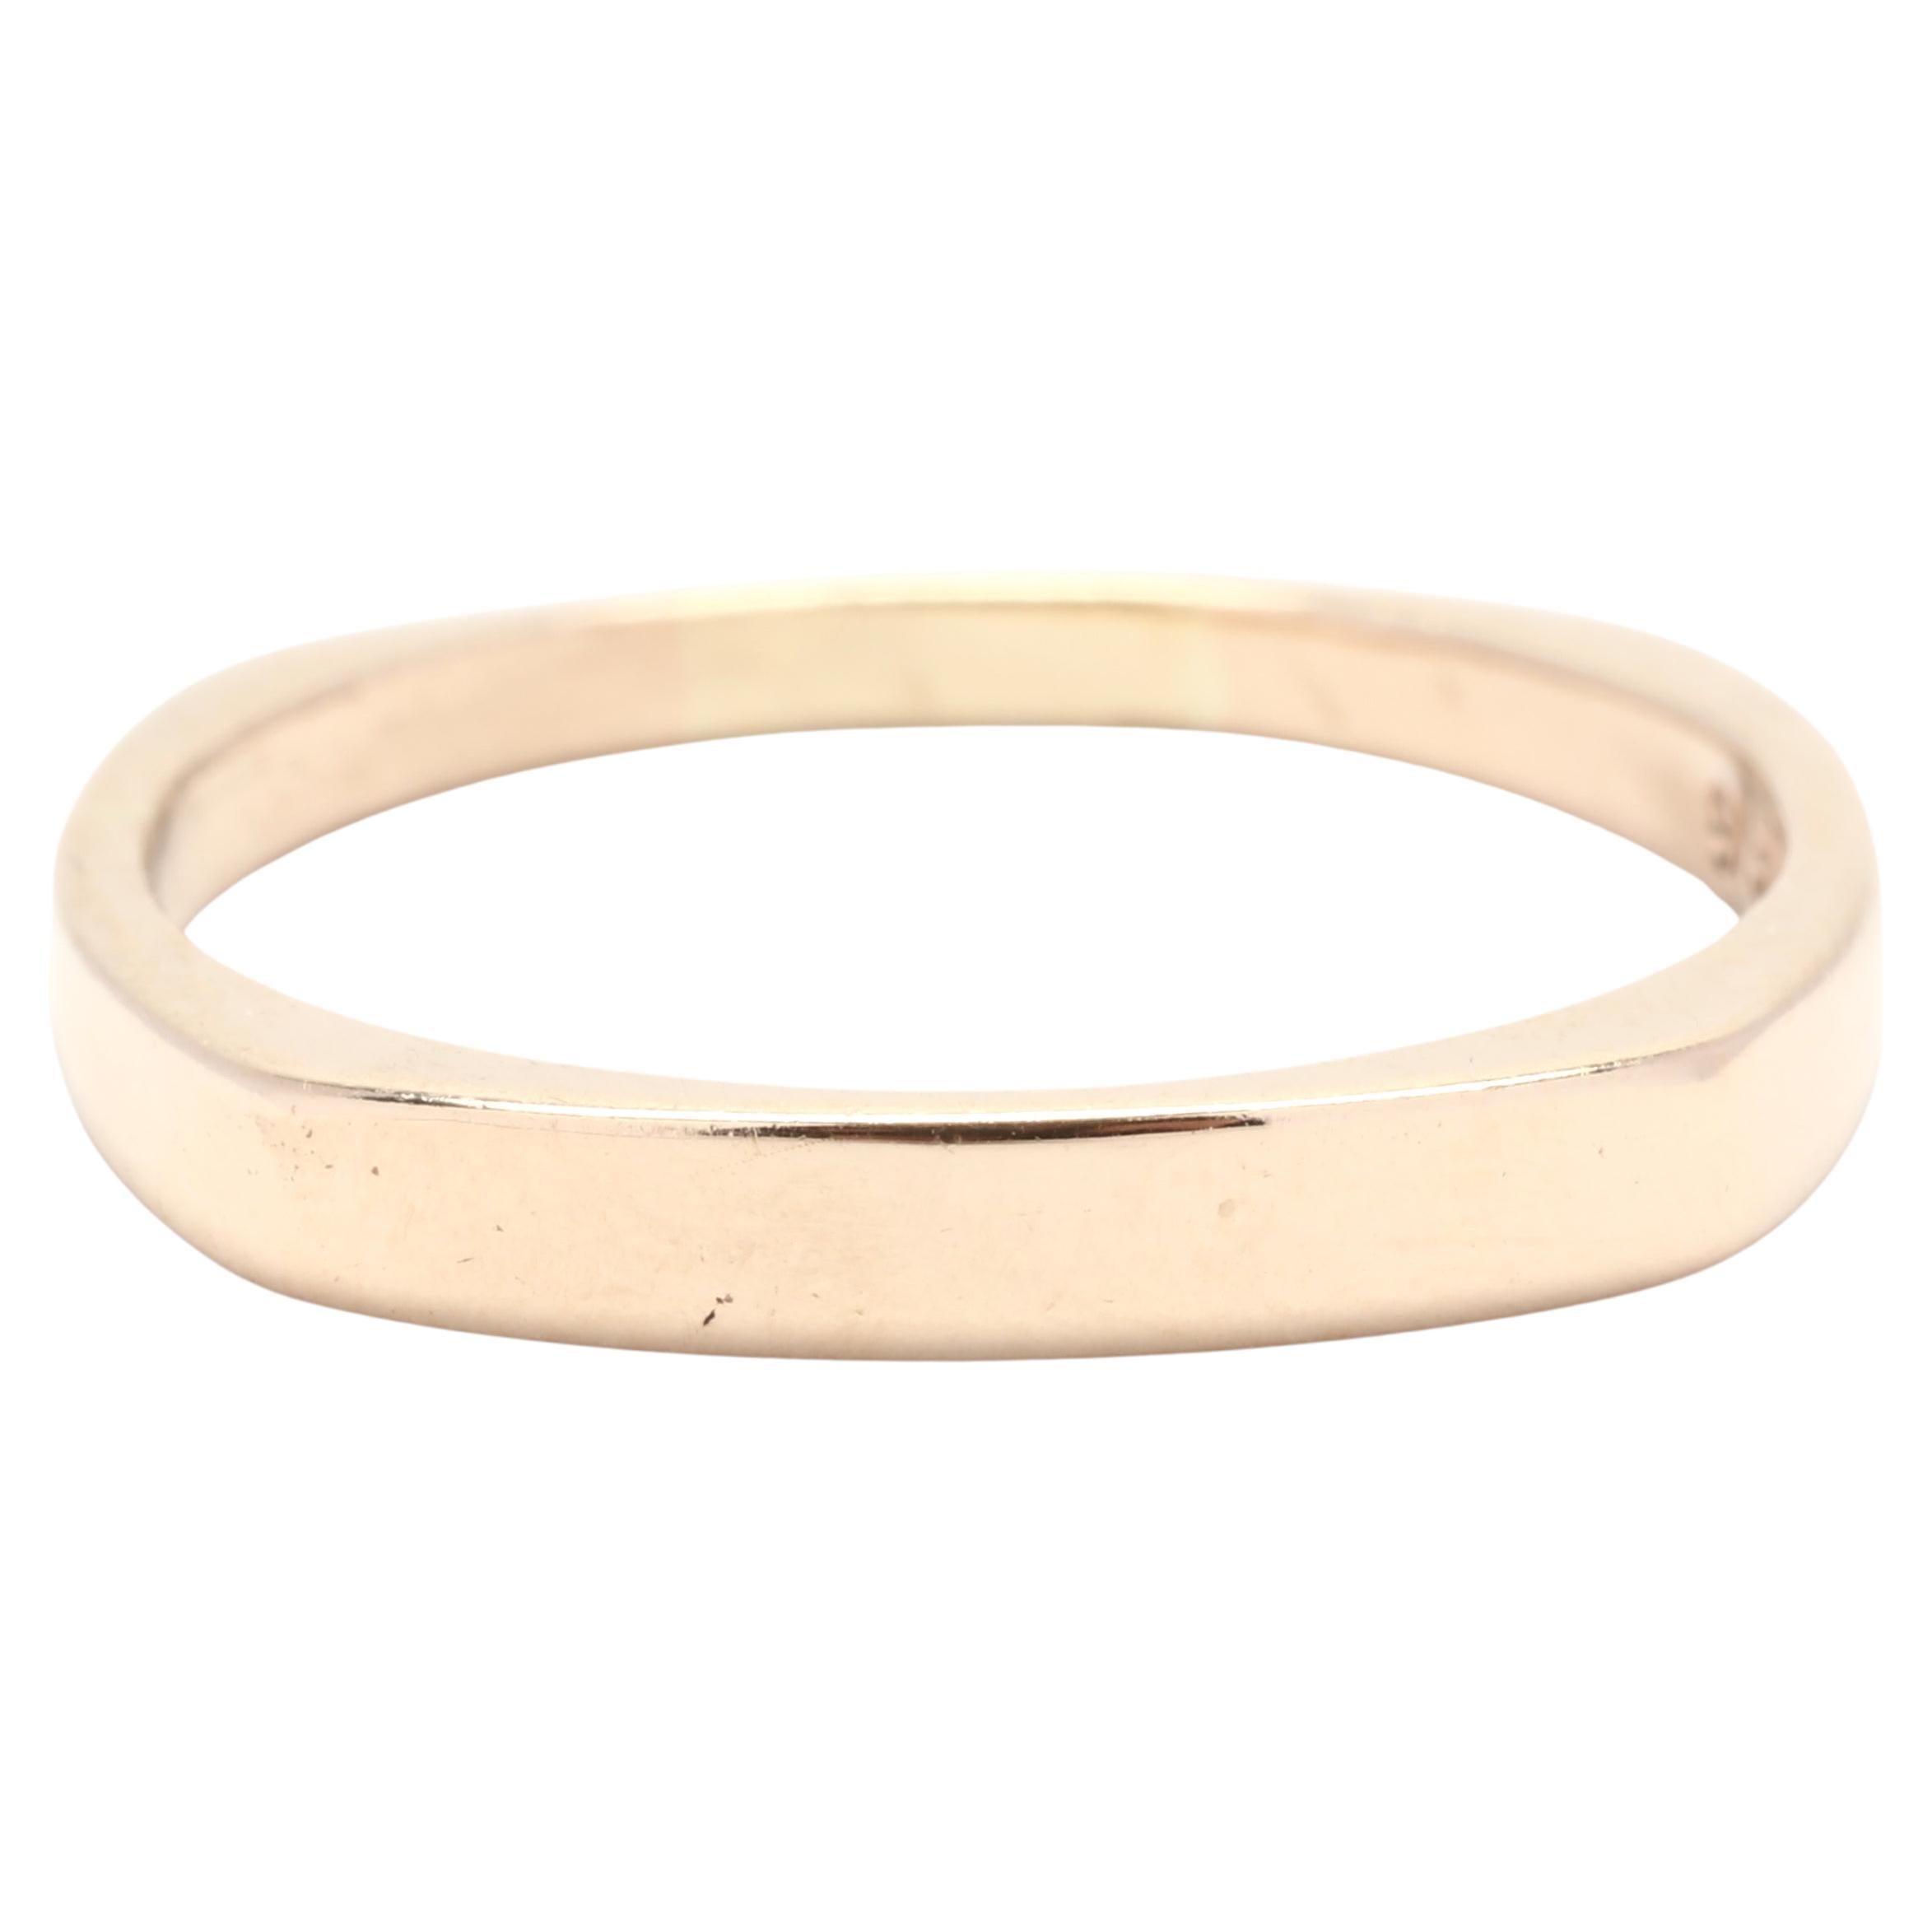 2.7mm Plain Wedding Band, 14K Yellow Gold, Ring Size 6, Stackable Band